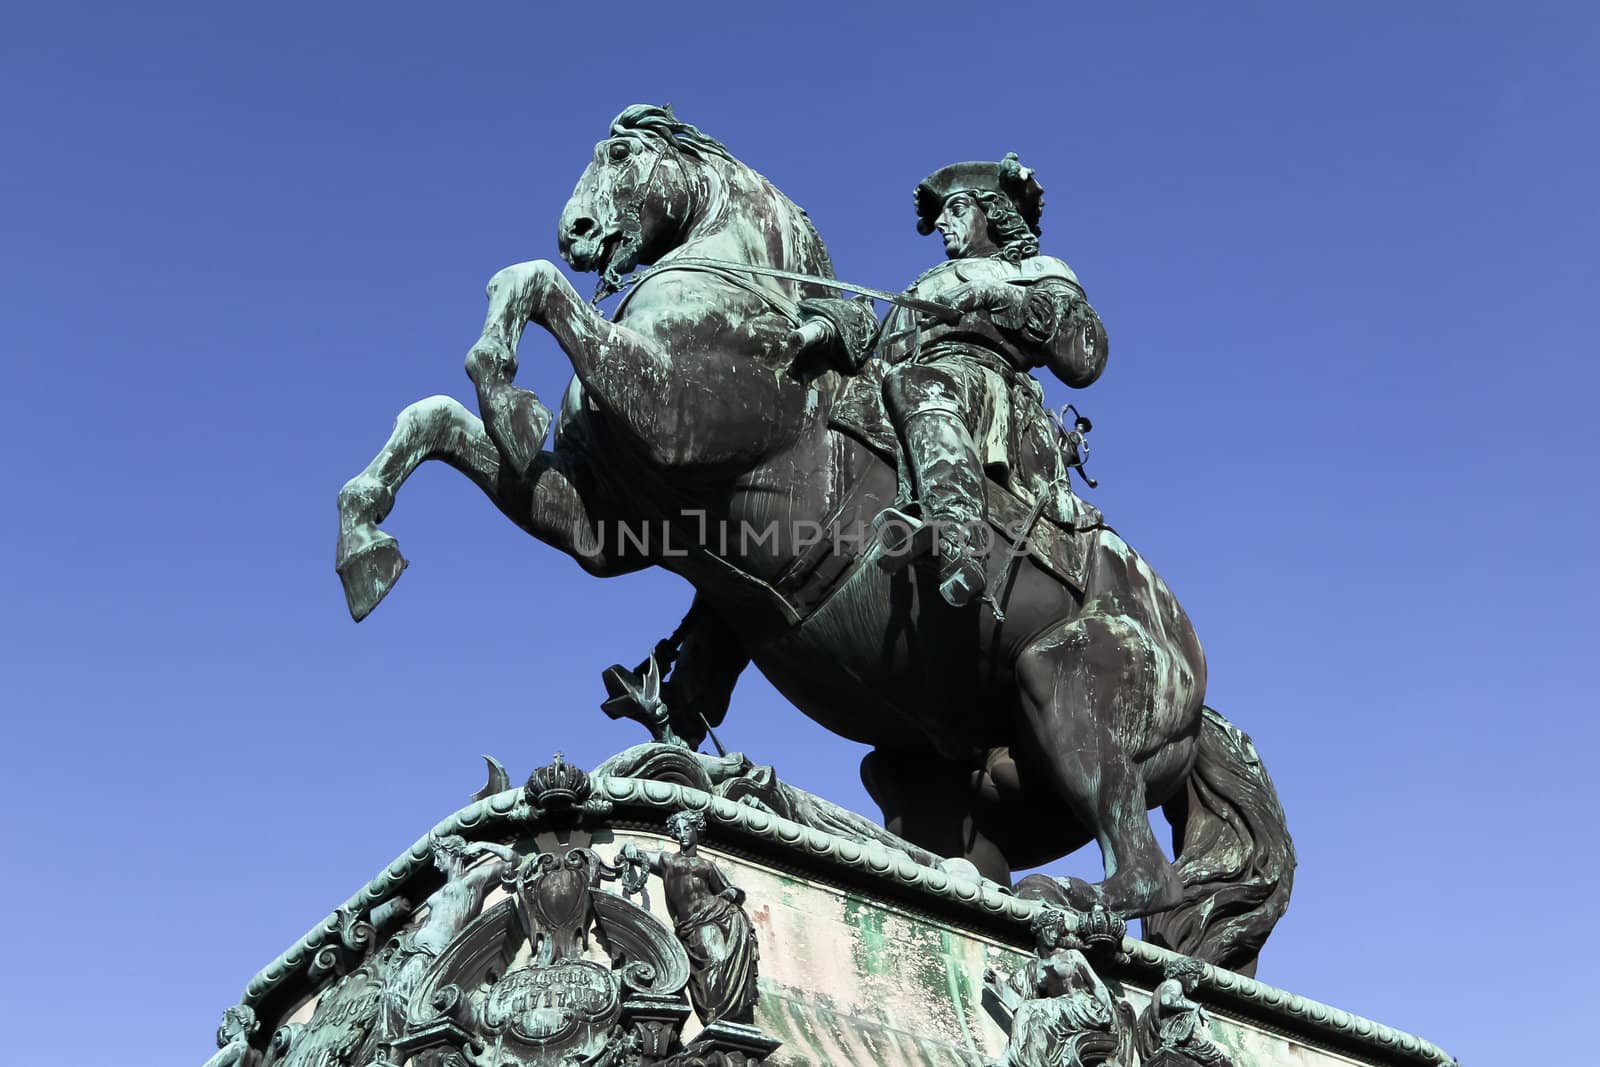 The famous sculpture of Prinz Eugen from the 18th century at Heldenplatz, Vienna